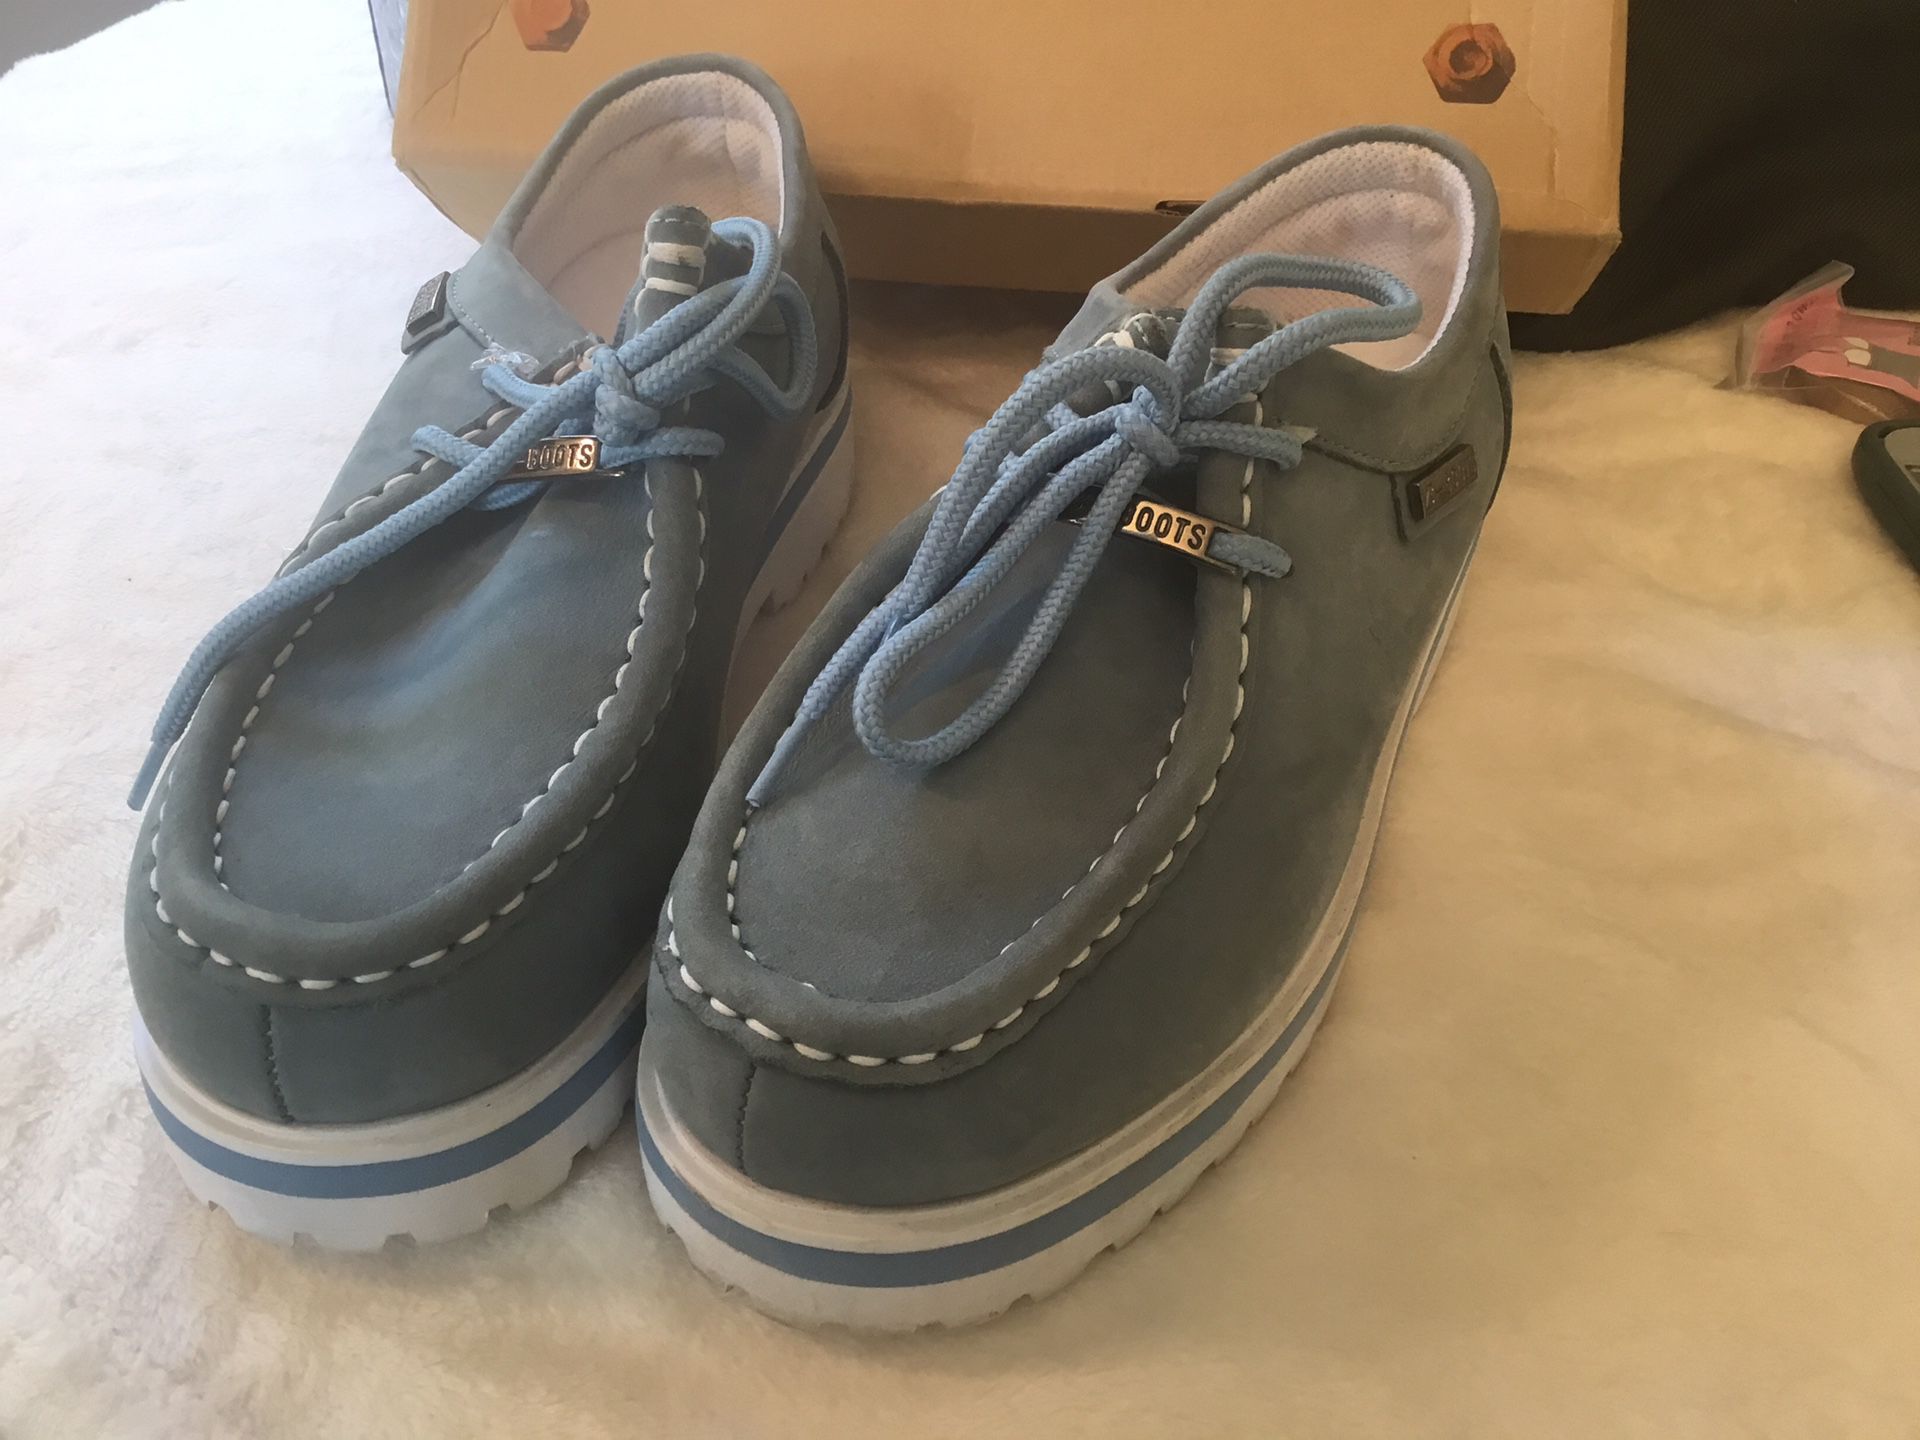 Boy shoes size 5 in brand new condition